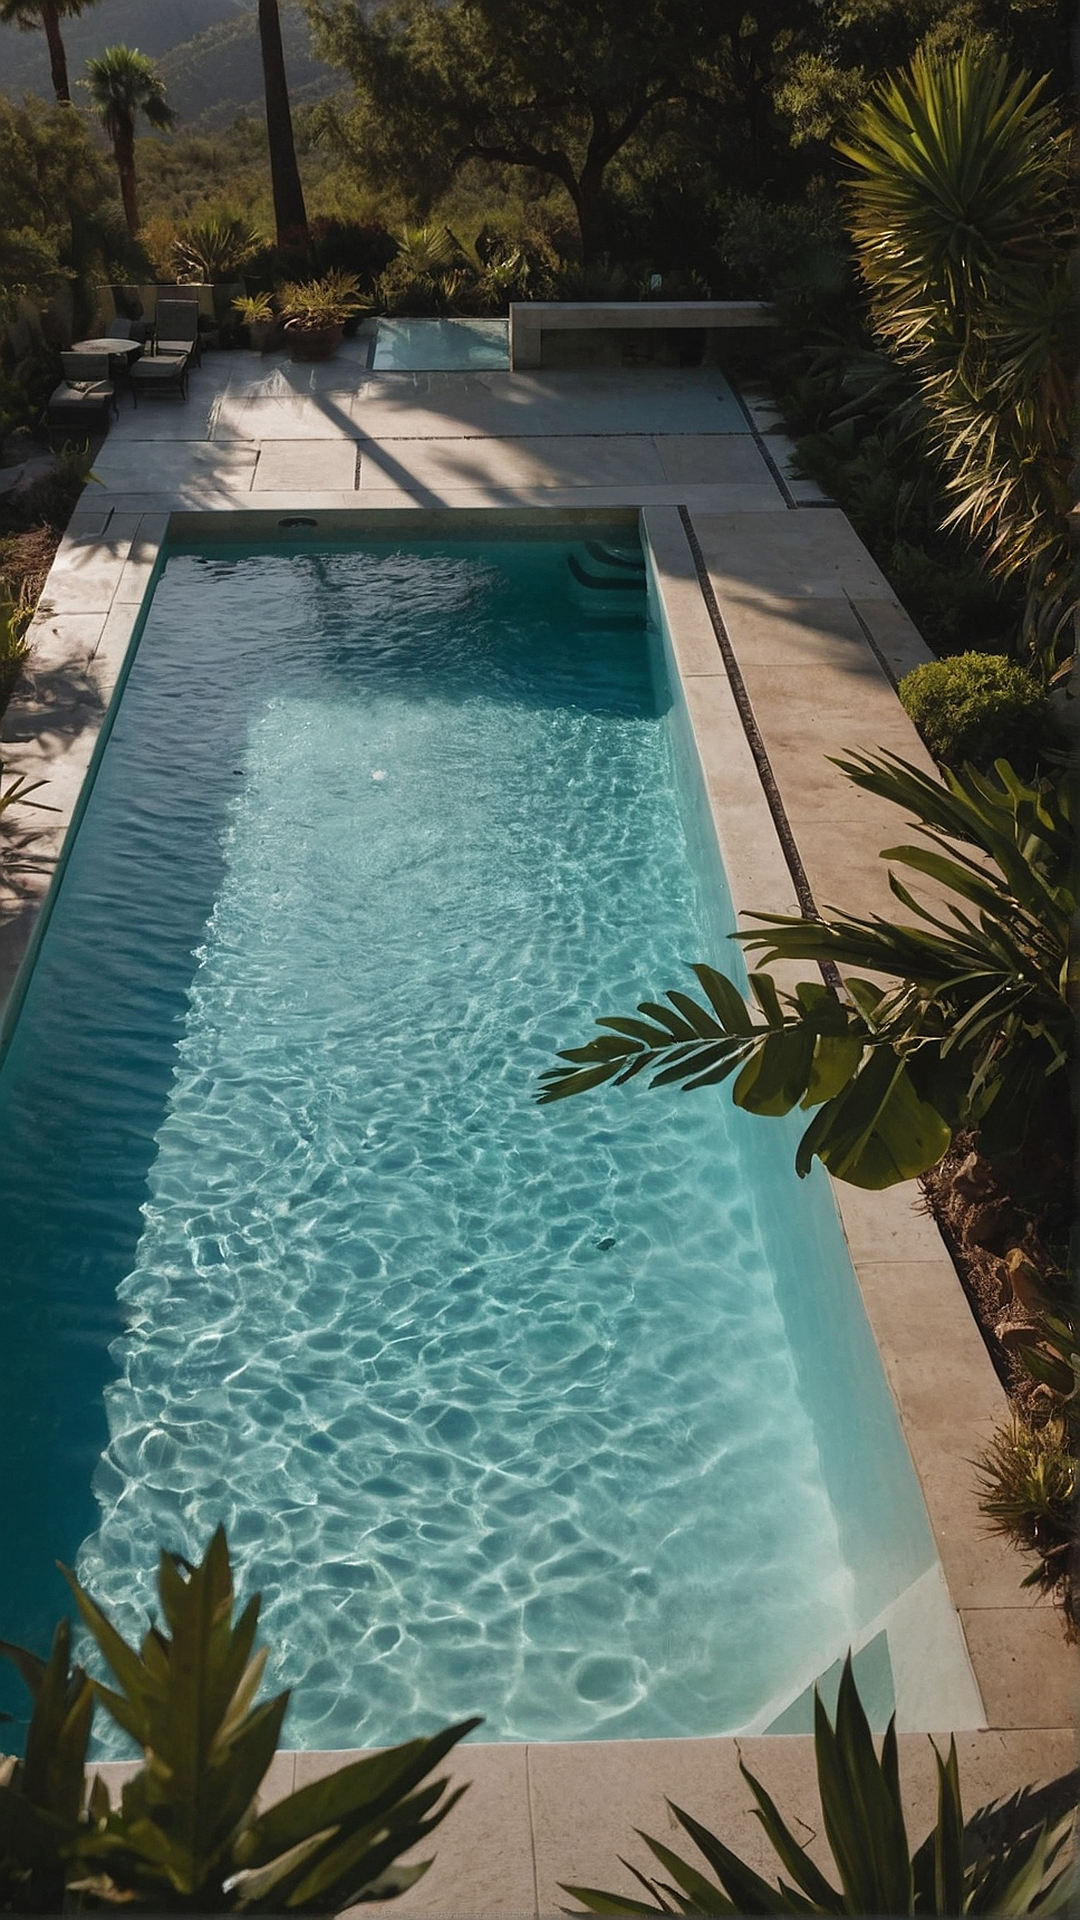 Into the Wild: Untamed Nature Pool Inspirations